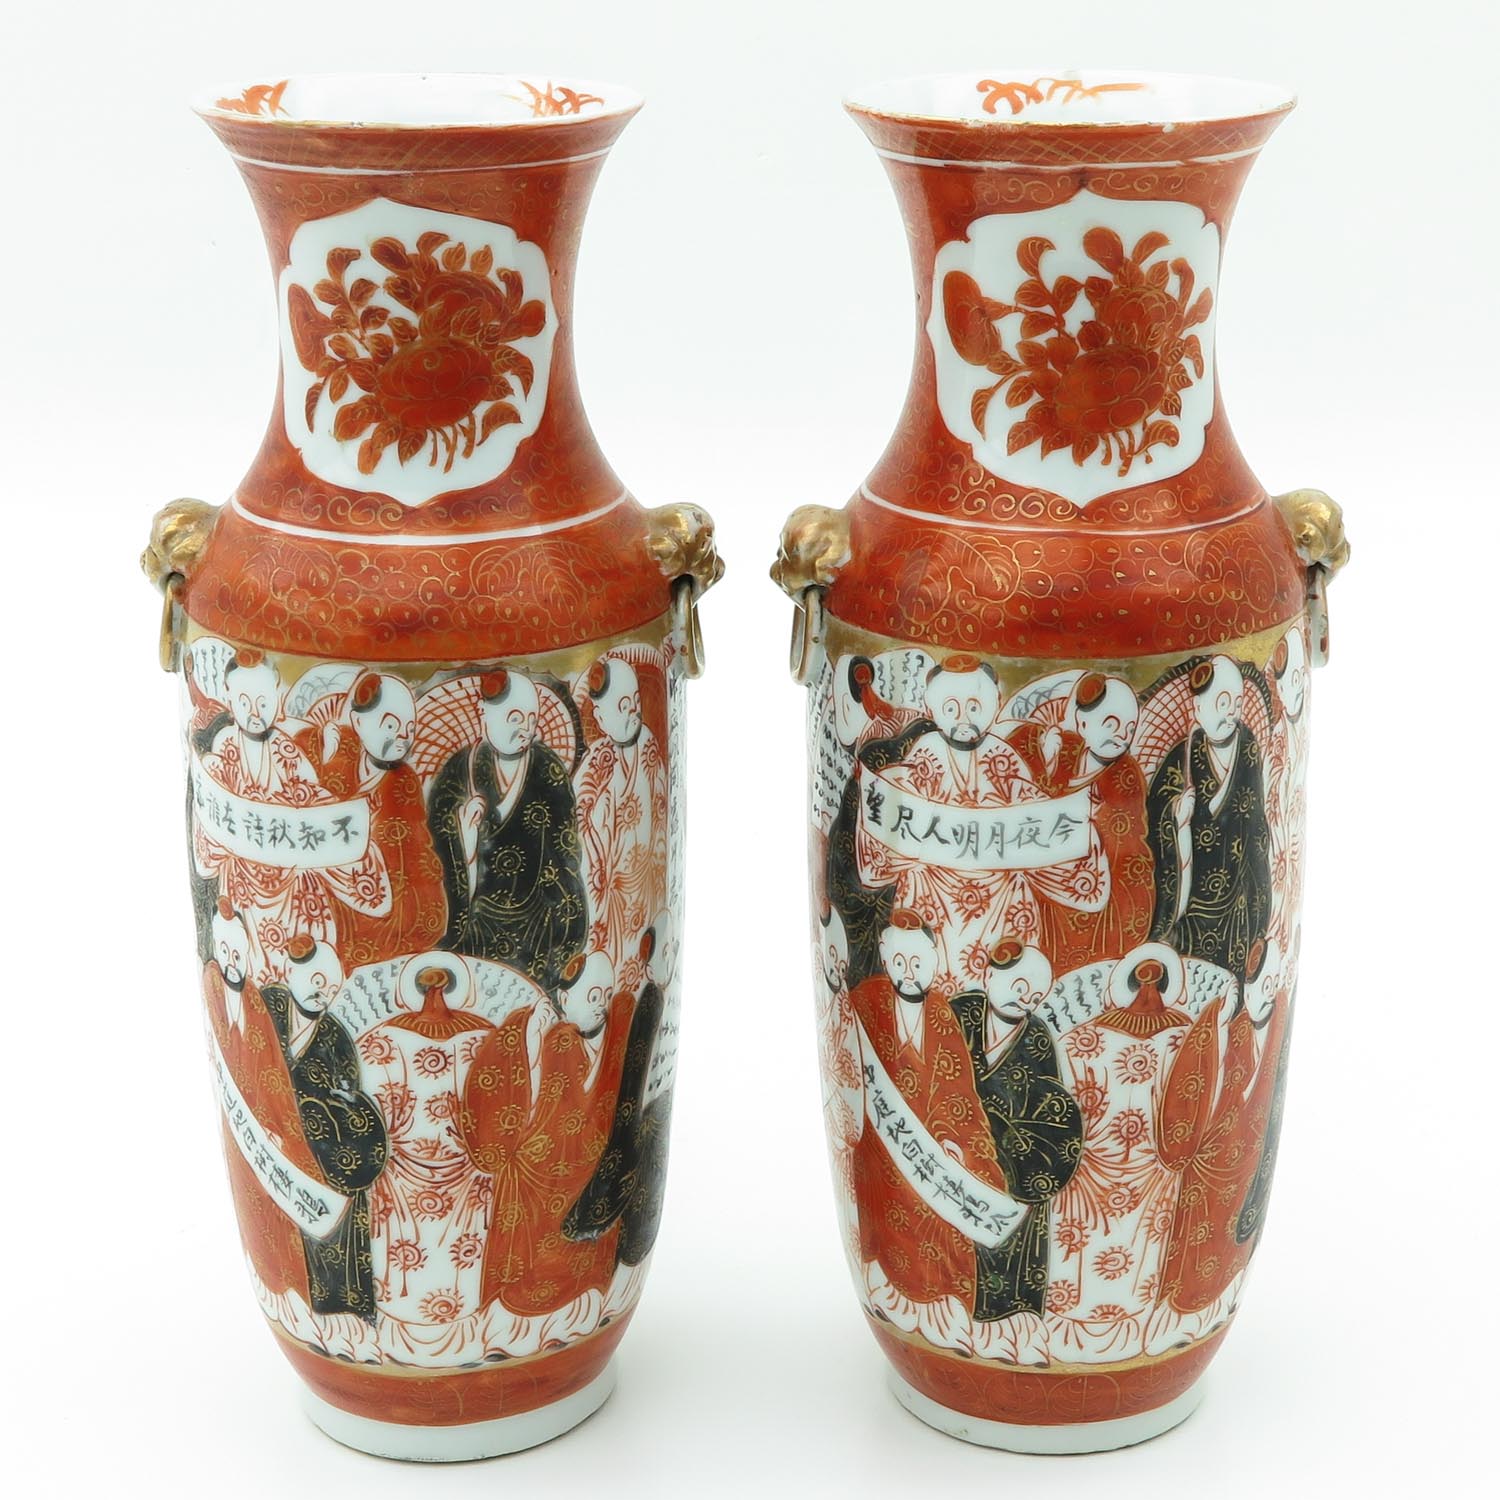 A Pair of Orange and Gilt Vases